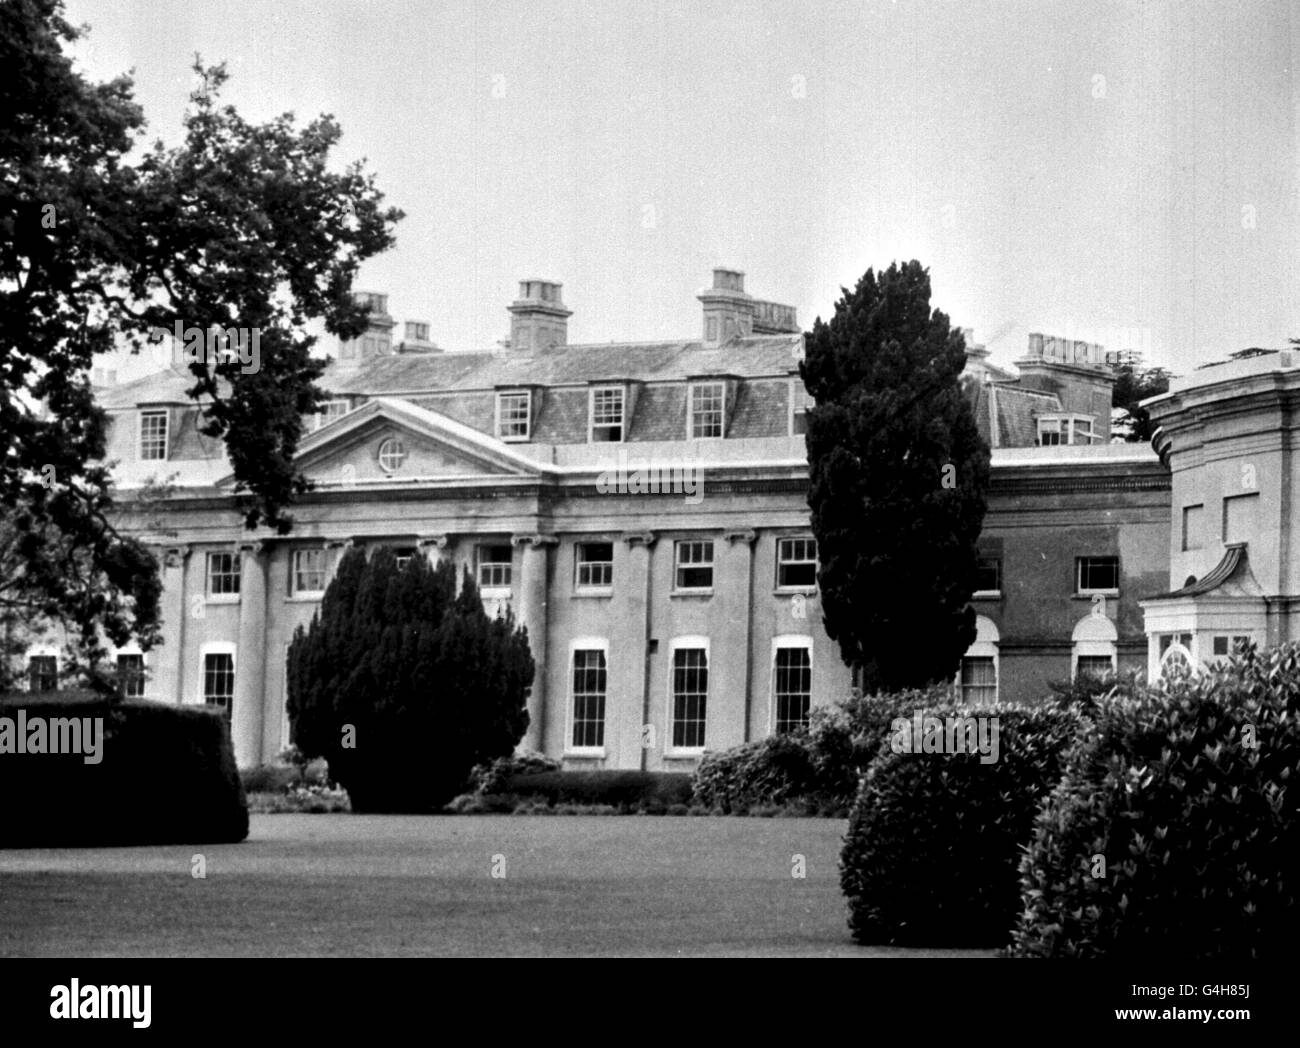 PA NEWS PHOTO 12/2/63  THE EXTERIOR OF THE EAST WING OF ICKWORTH MANSION, HOME NEAR BURY ST. EDMUNDS, SUFFOLK OF THE MARQUESS AND MARCHIONESS OF BRISTOL Stock Photo